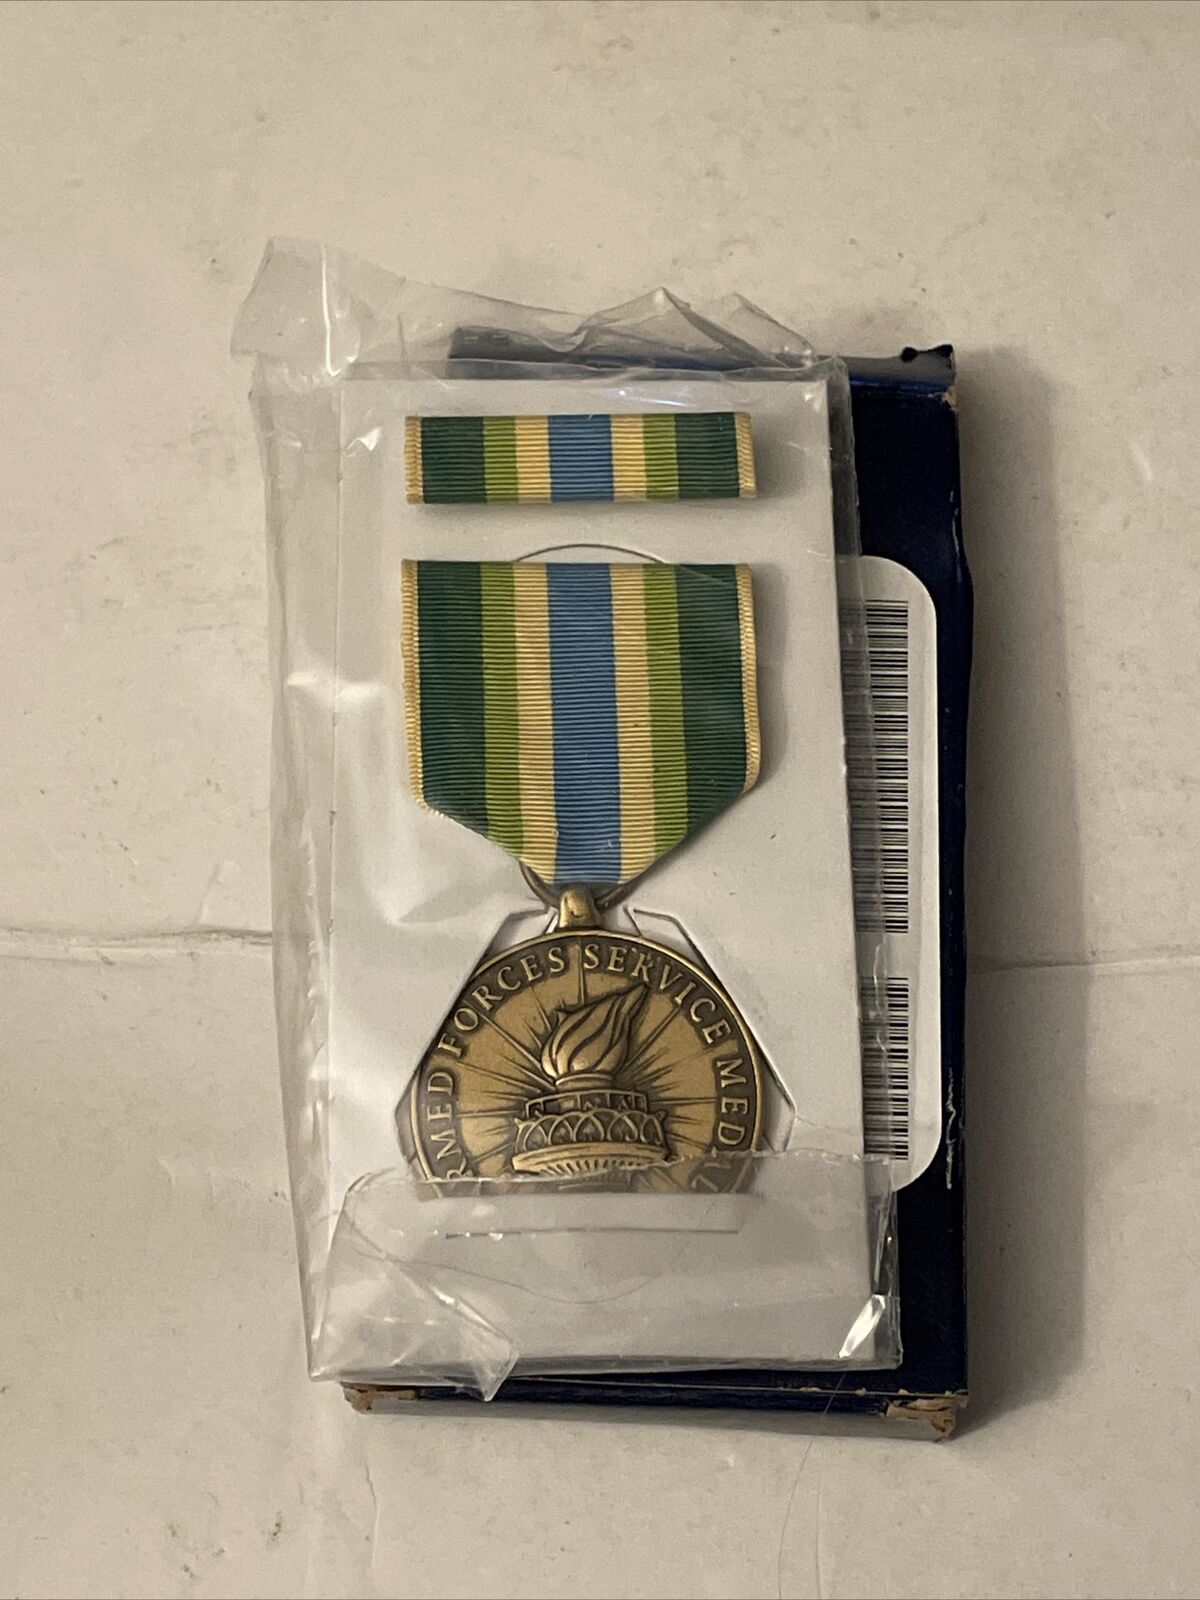 A6 GENUINE U.S. MINIATURE MEDAL: ARMED FORCES SERVICE MEDAL New With Box